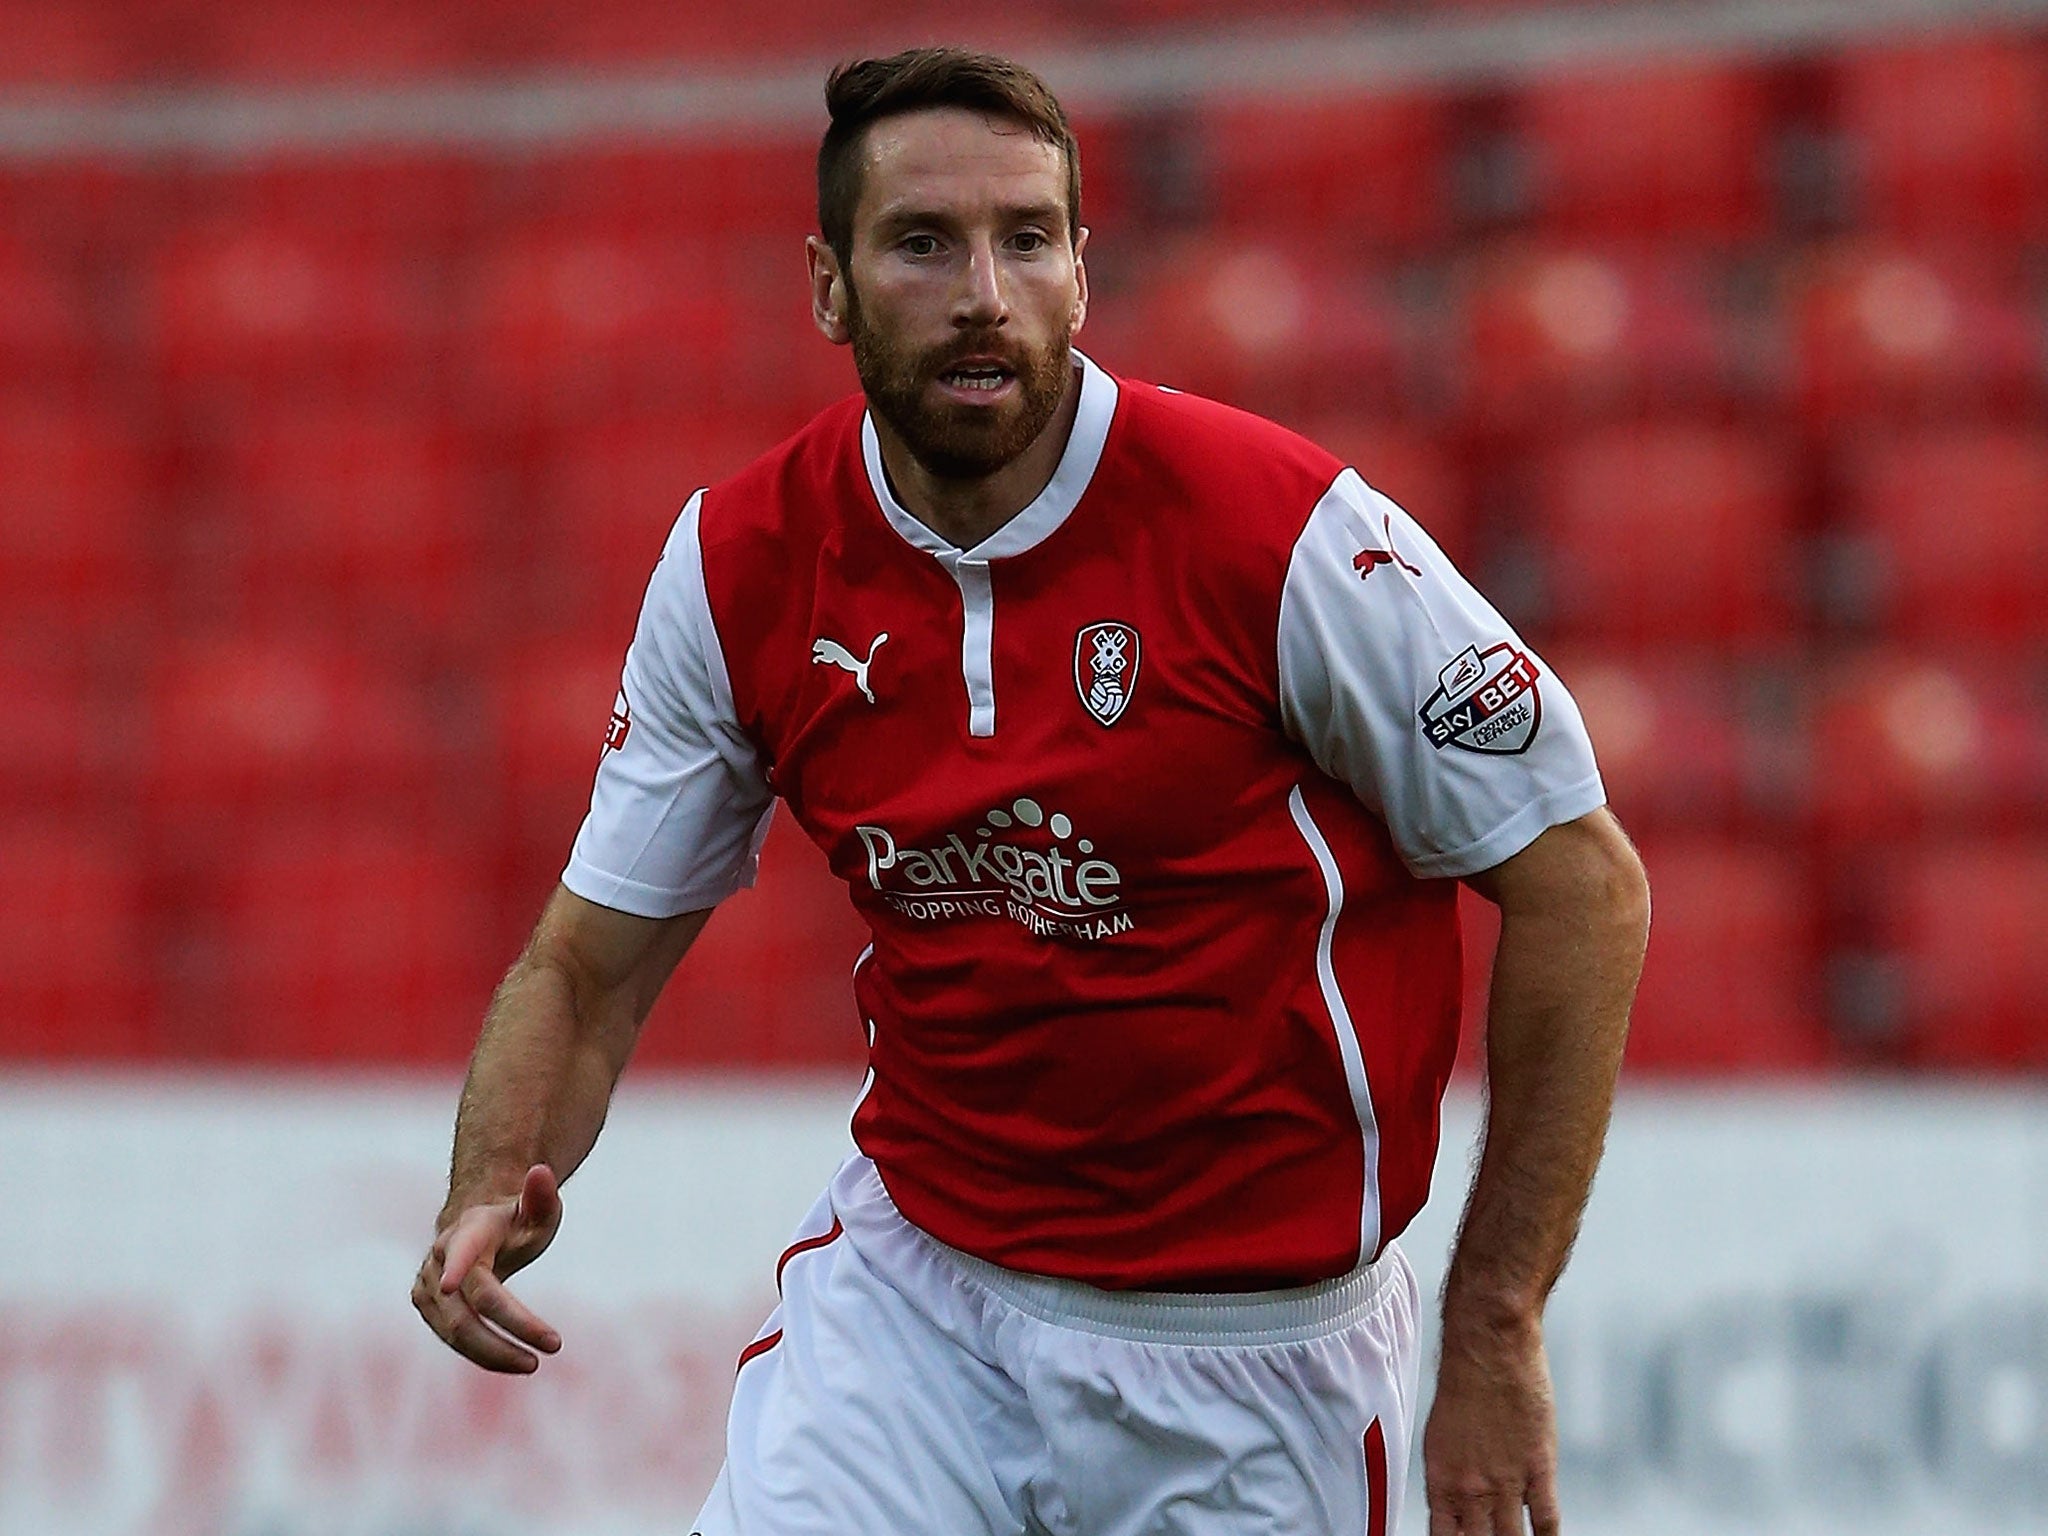 Rotherham defender Kirk Broadfoot has been banned for 10 games